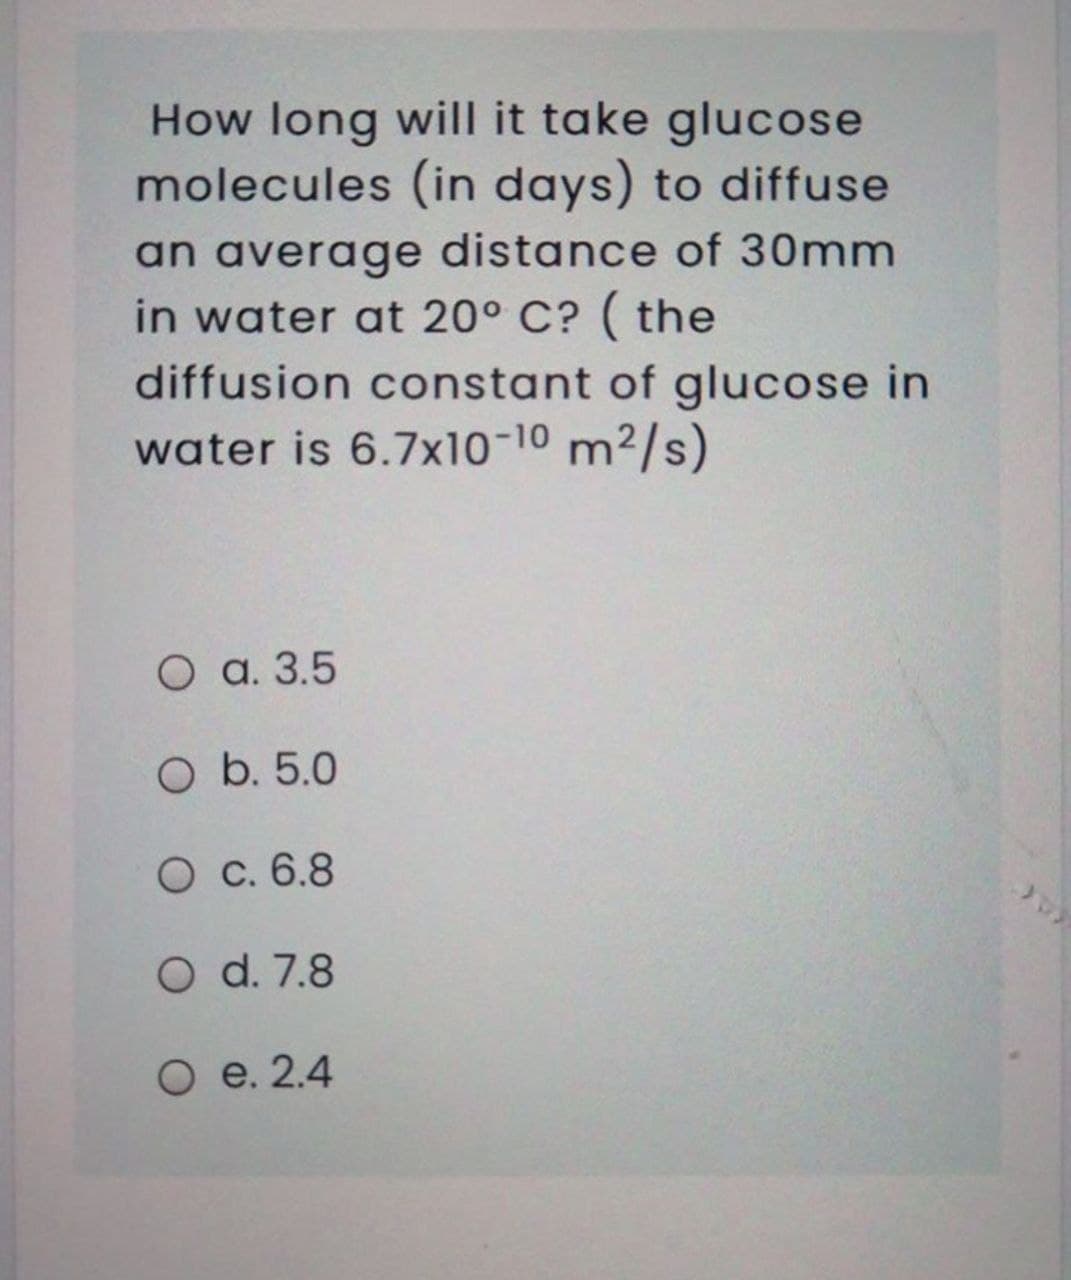 How long will it take glucose
molecules (in days) to diffuse
an average distance of 30mm
in water at 20° C? ( the
diffusion constant of glucose in
water is 6.7x10-10 m2/s)
O a. 3.5
O b. 5.0
O c. 6.8
O d. 7.8
O e. 2.4
